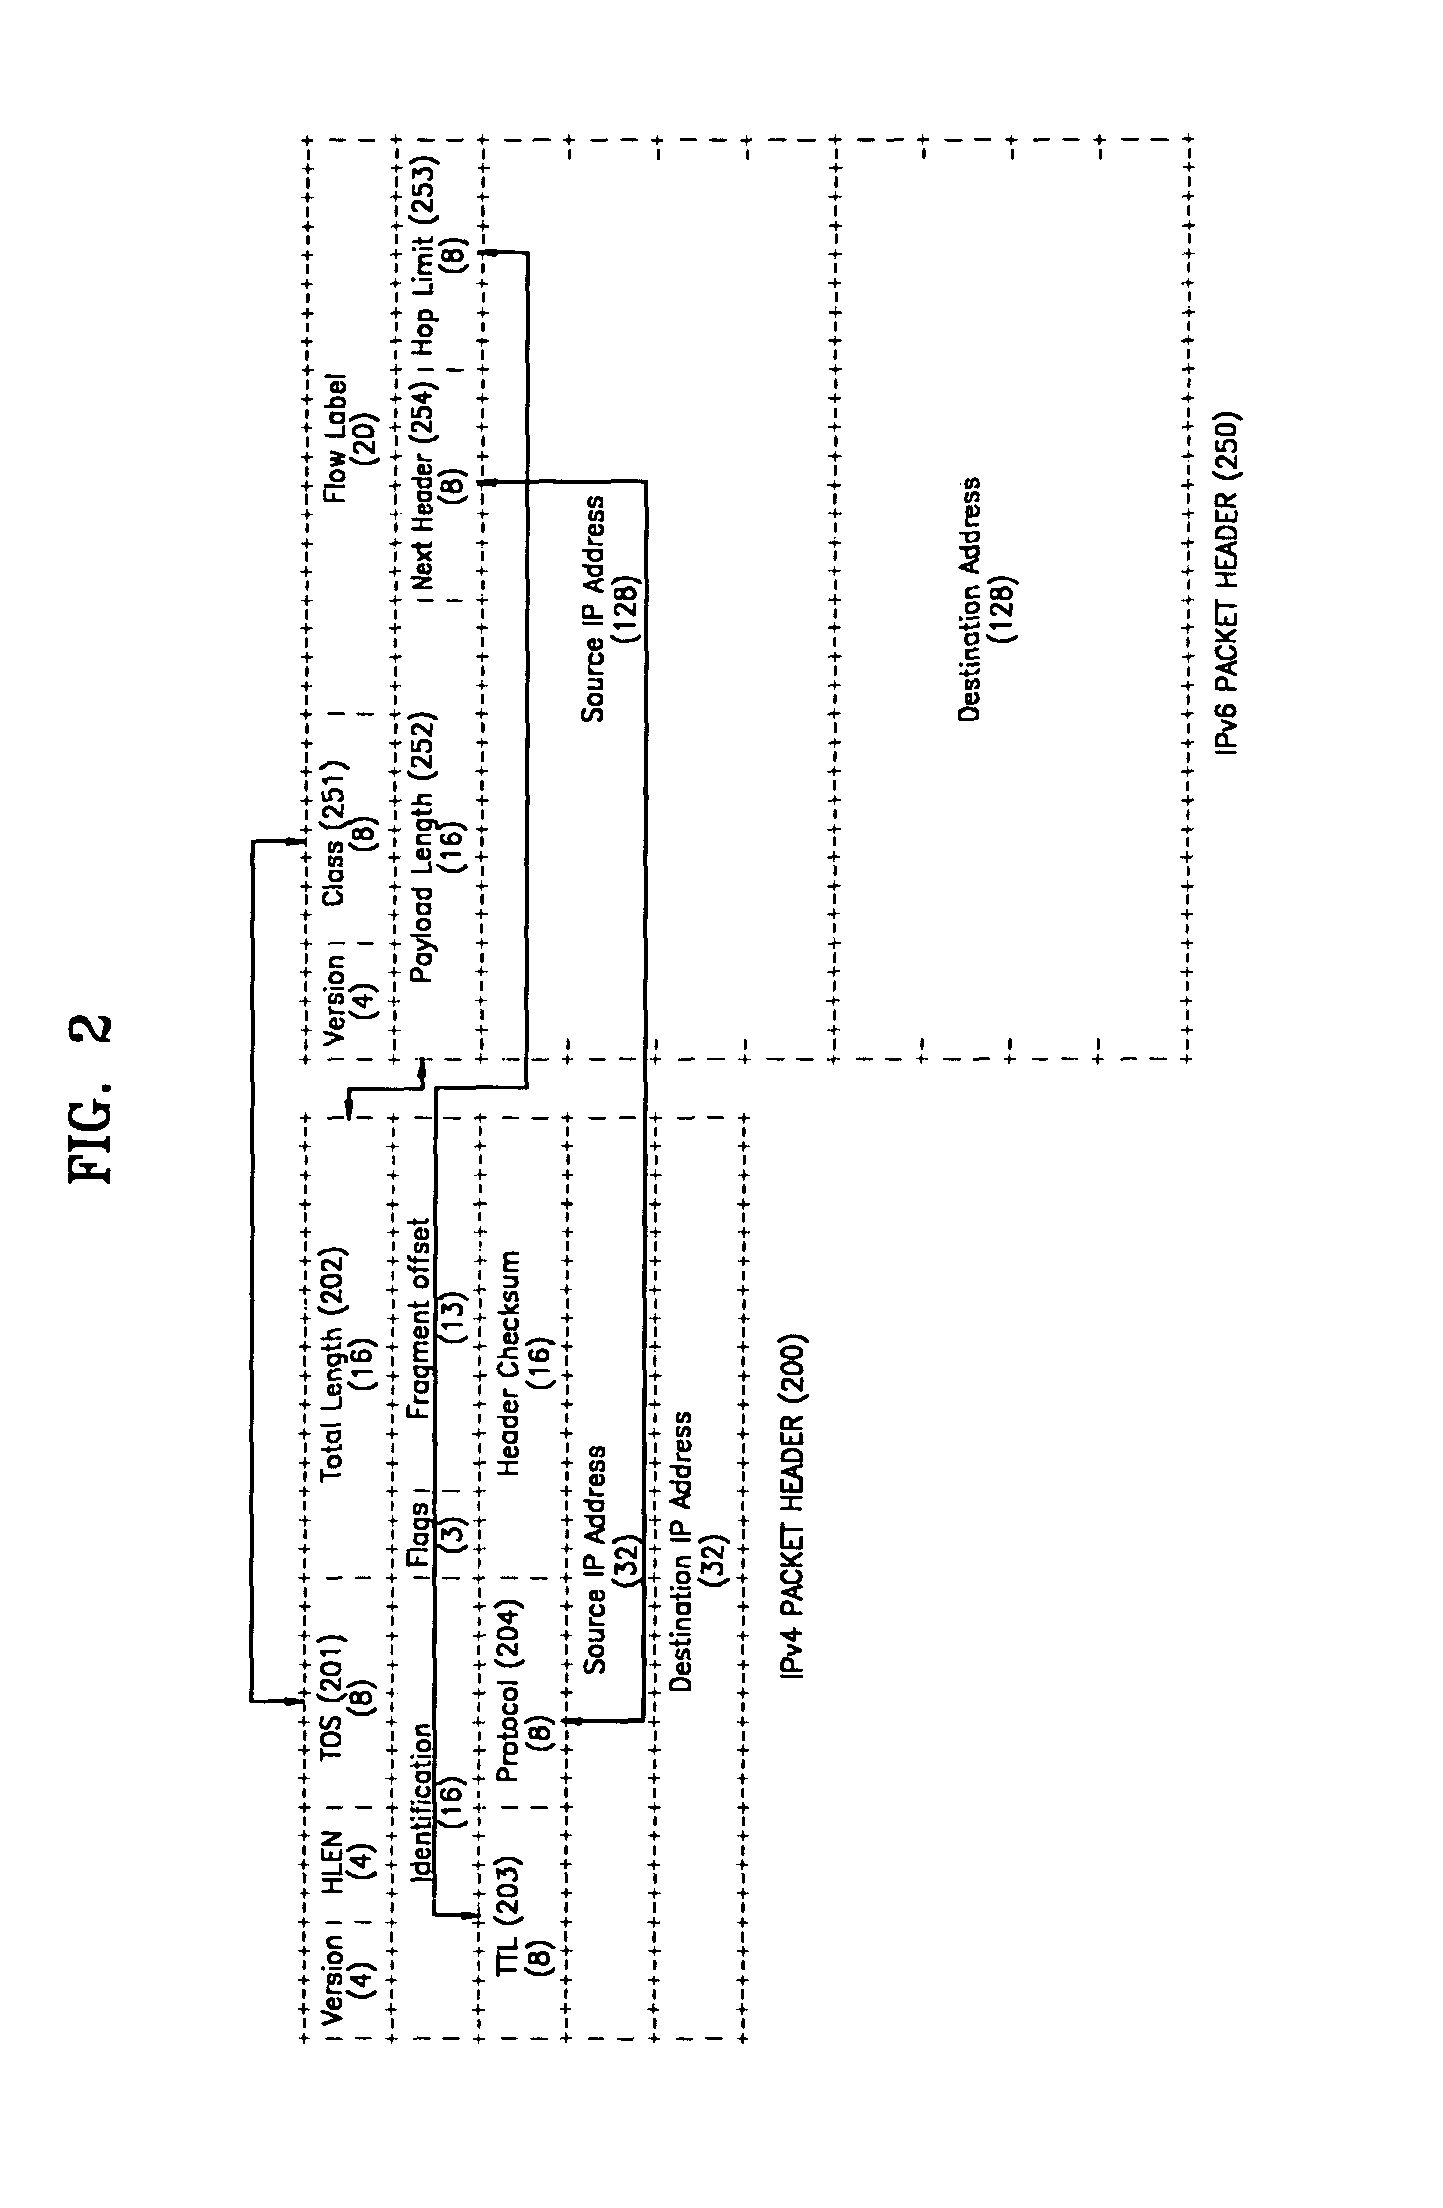 Method and apparatus for interconnecting IPv4 and IPv6 networks